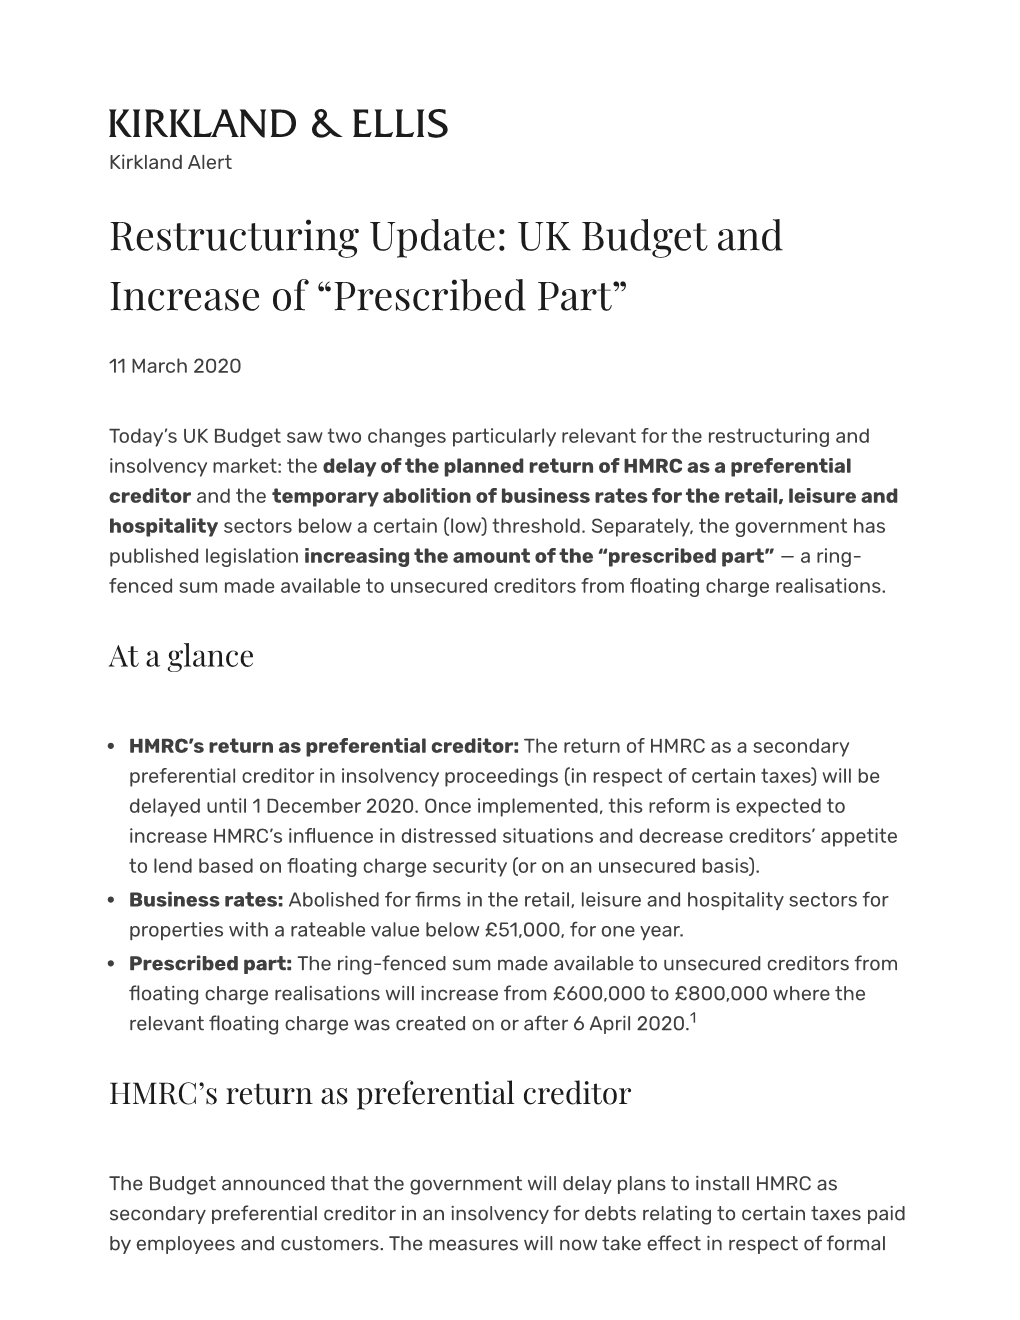 Restructuring Update: UK Budget and Increase of “Prescribed Part”